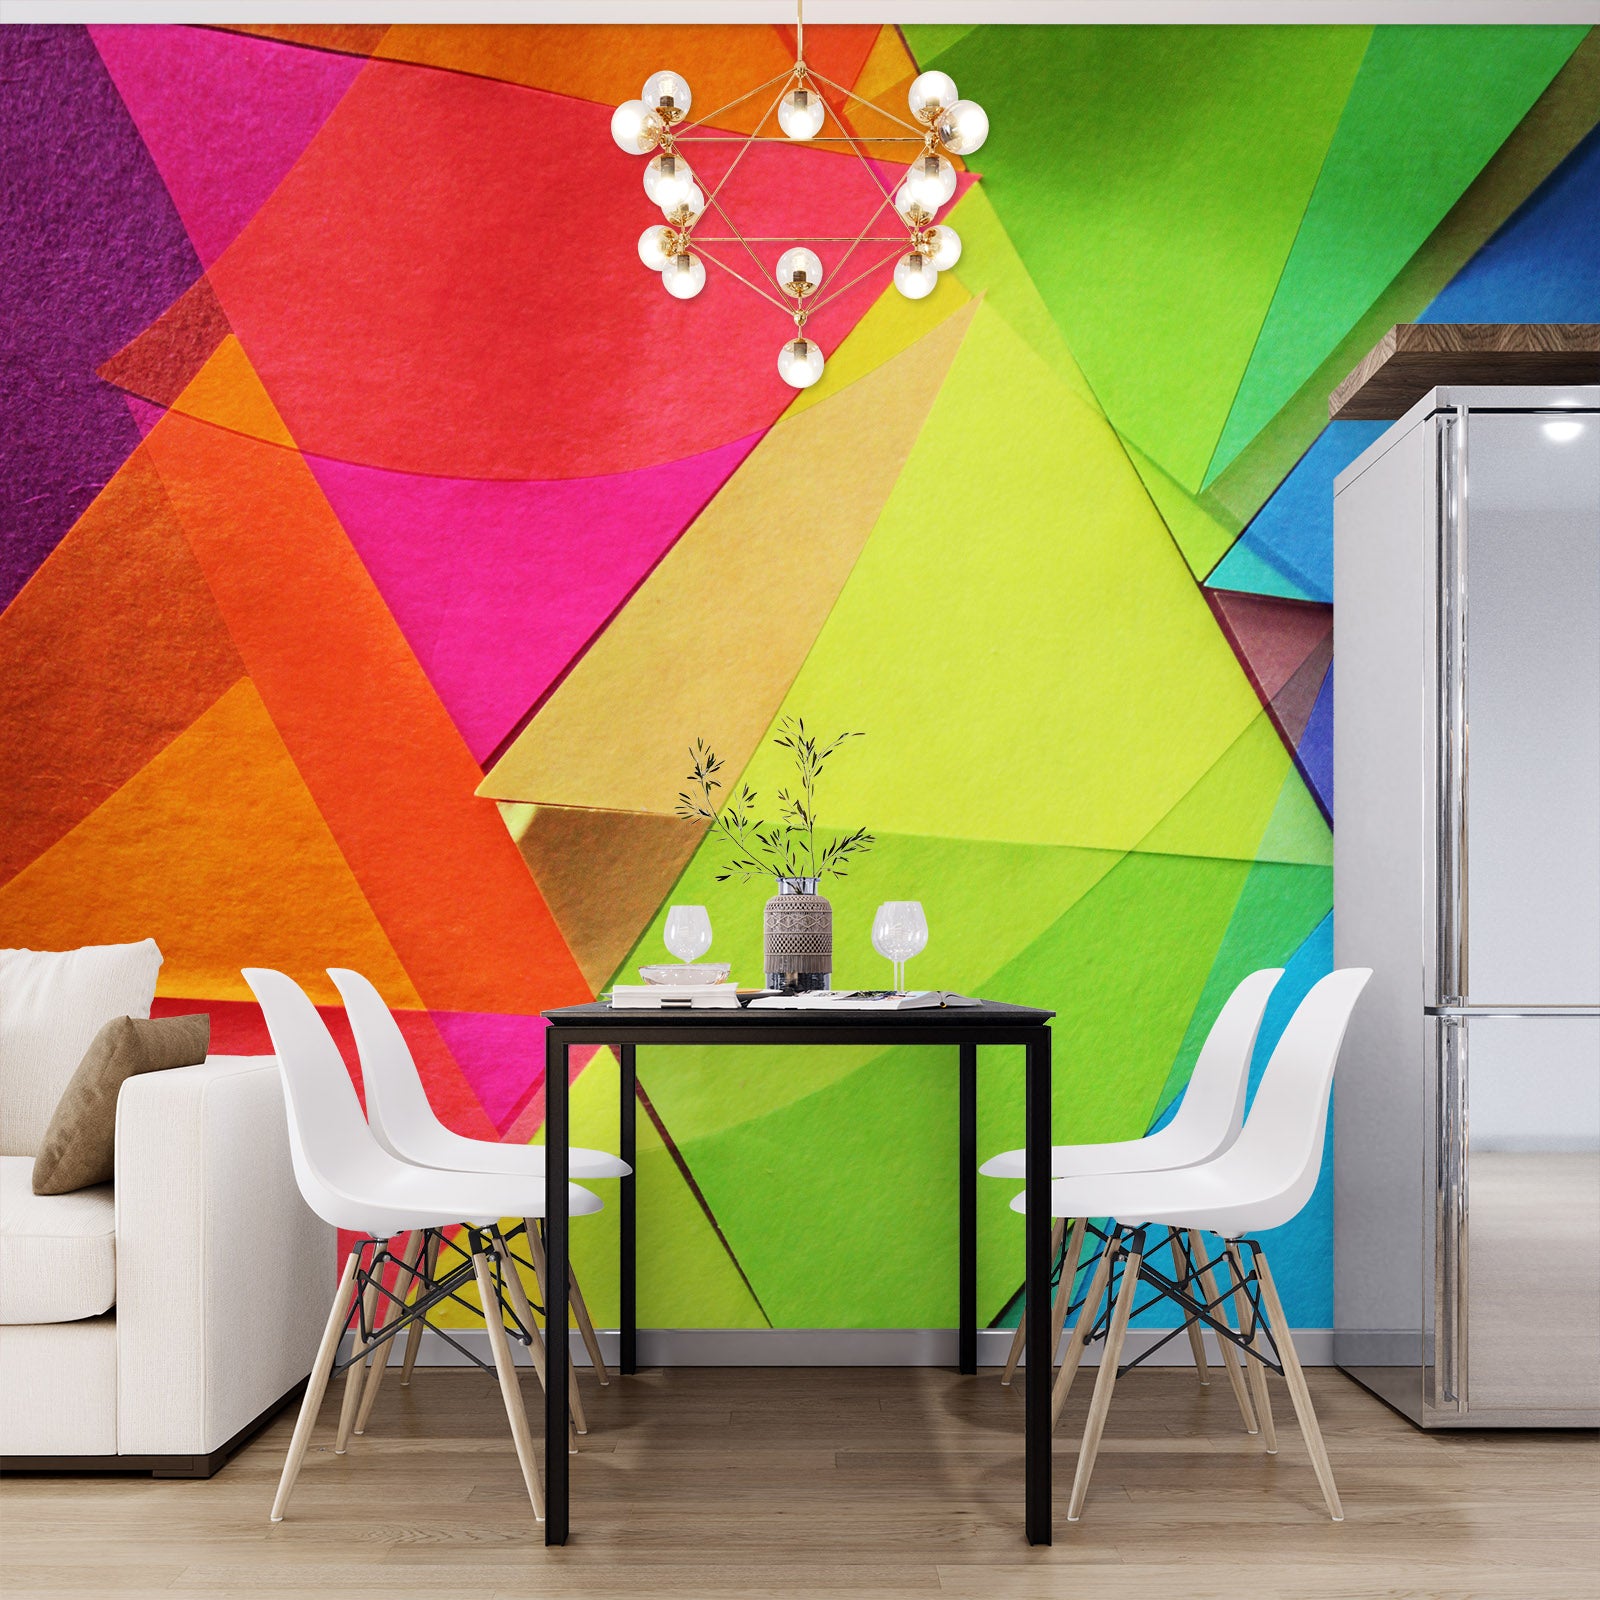 3D Colored Triangle 71089 Shandra Smith Wall Mural Wall Murals